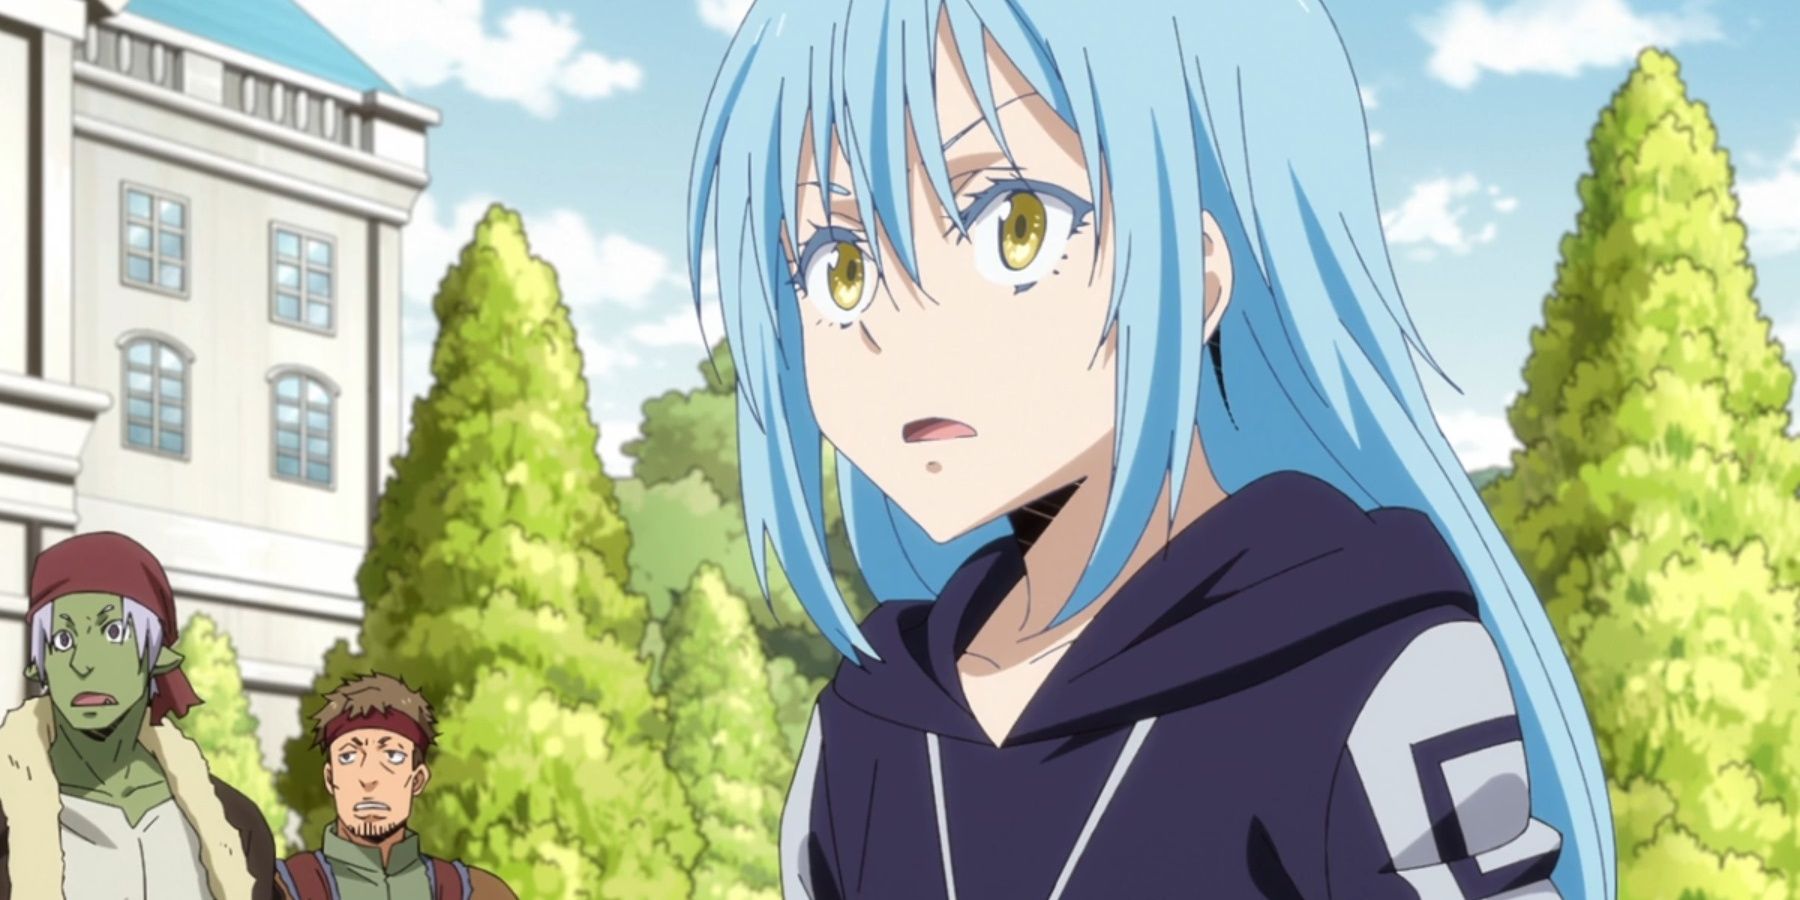 Rimuru Tempest looking surprised in That Time I Got Reincarnated As A Slime.